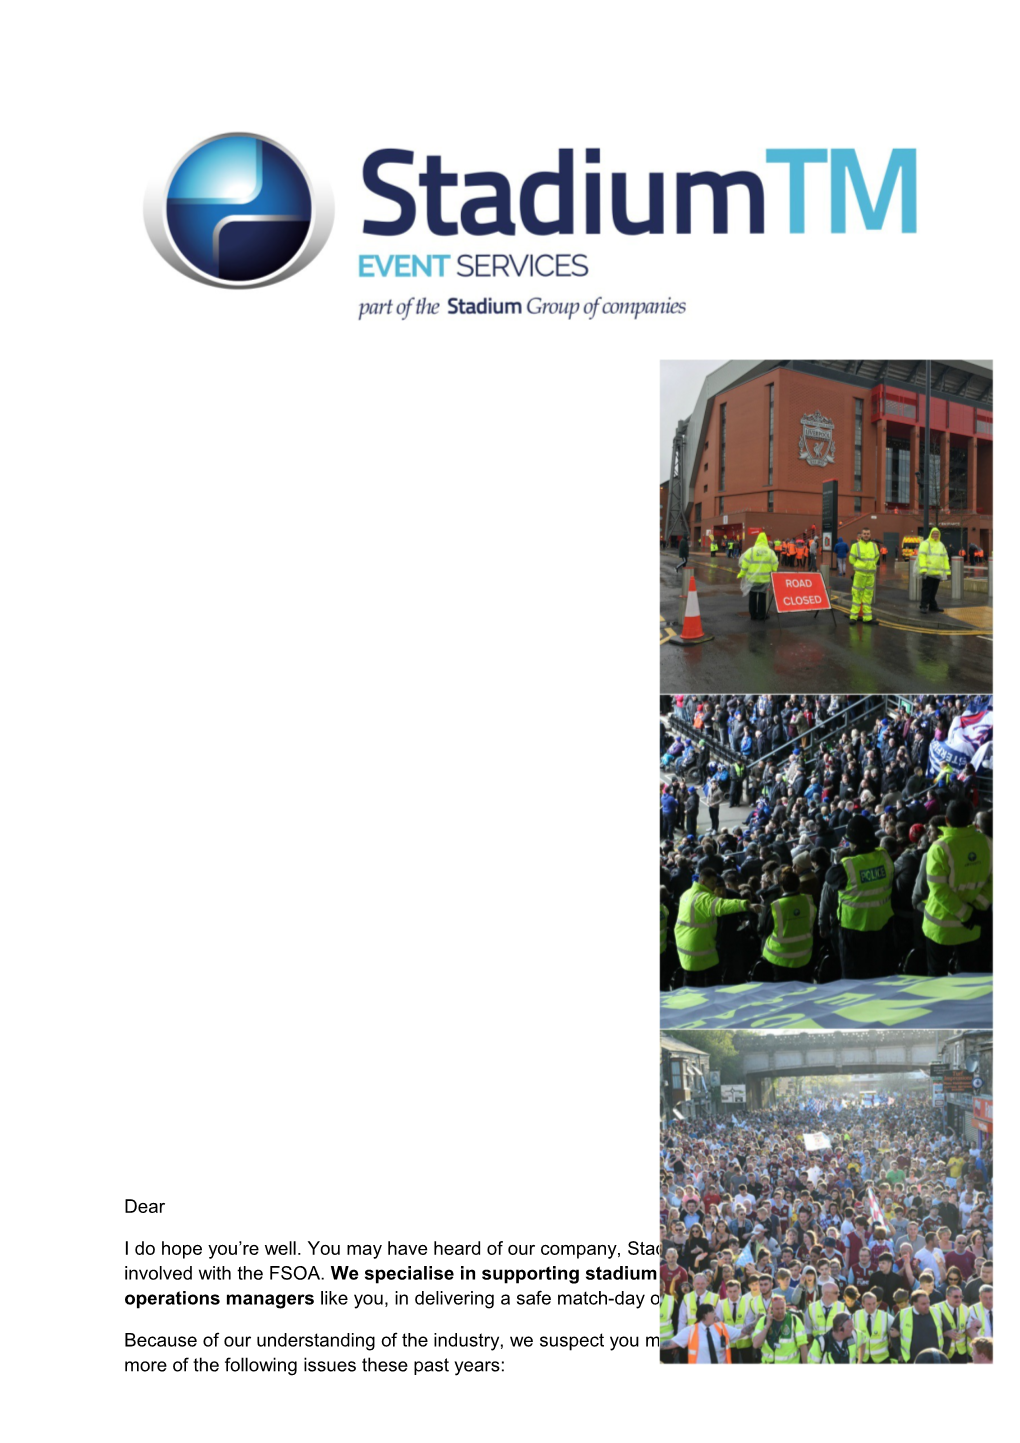 I Do Hope You Re Well. You May Have Heard of Our Company, Stadiumtm, As We Re Heavilyinvolved